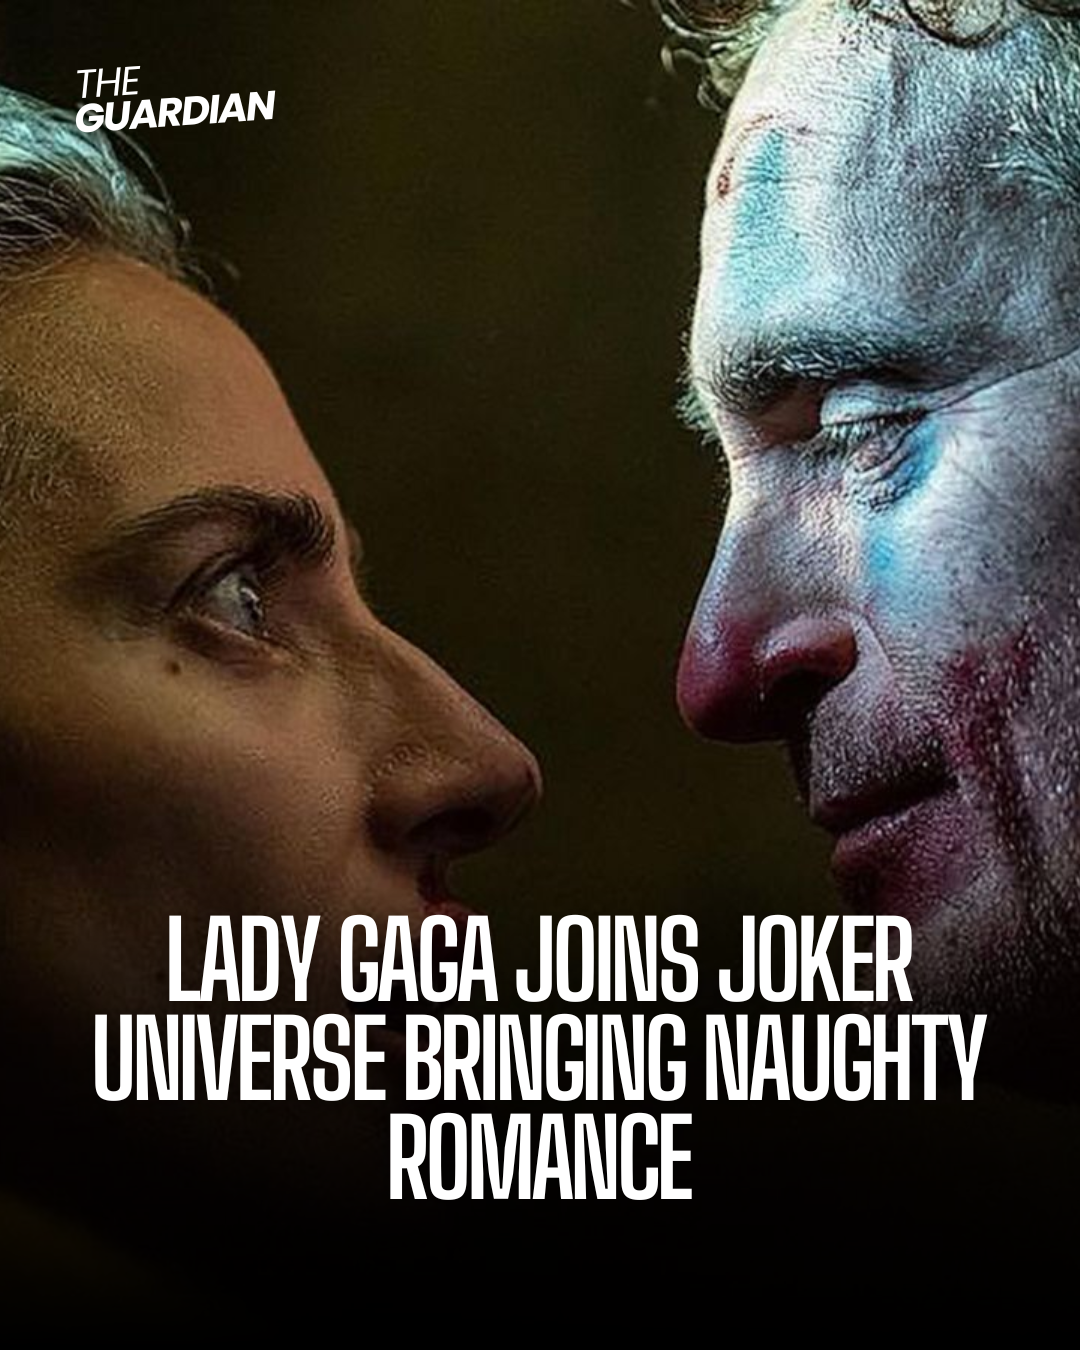 In its first teaser, Lady Gaga is seen getting the tune, dance, and naughty romance to the Joker movie sequel.